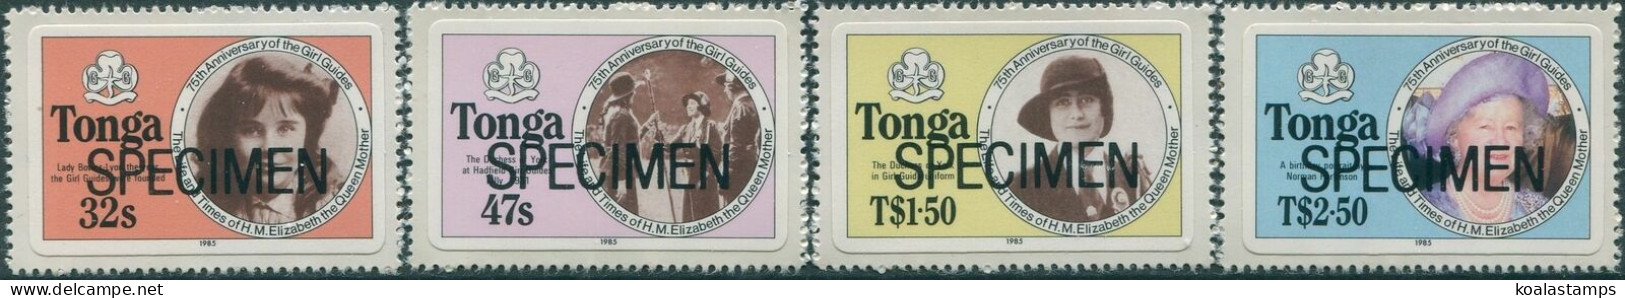 Tonga 1985 SG915A-918A Queen Mother Die Cut Specimen Set MNH - Tonga (1970-...)